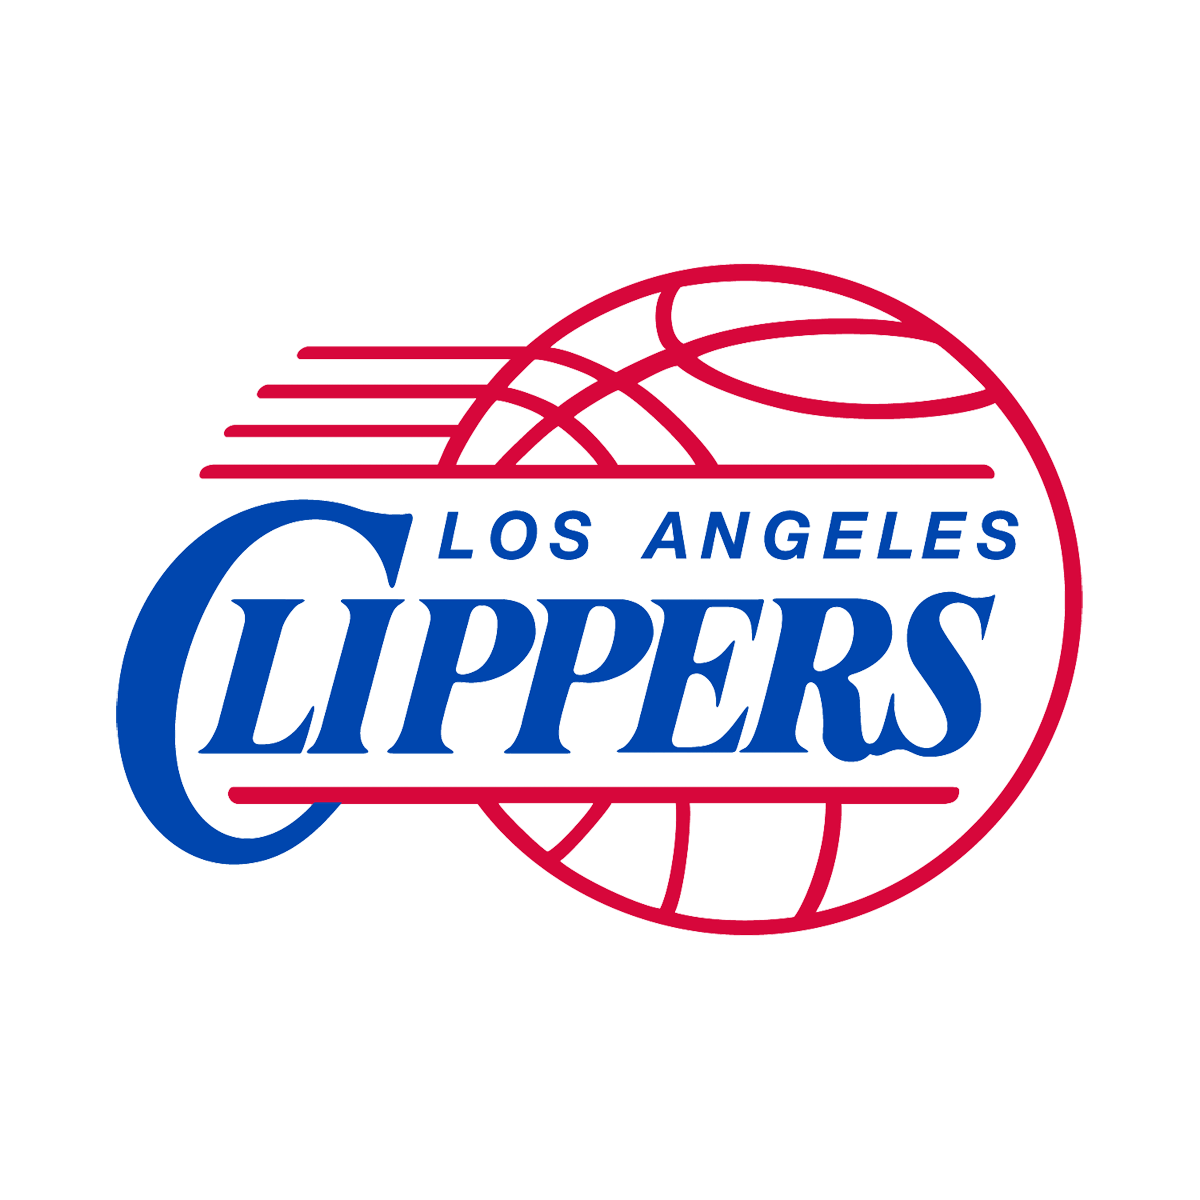 Los Angeles Clippers Logo PNG Pic